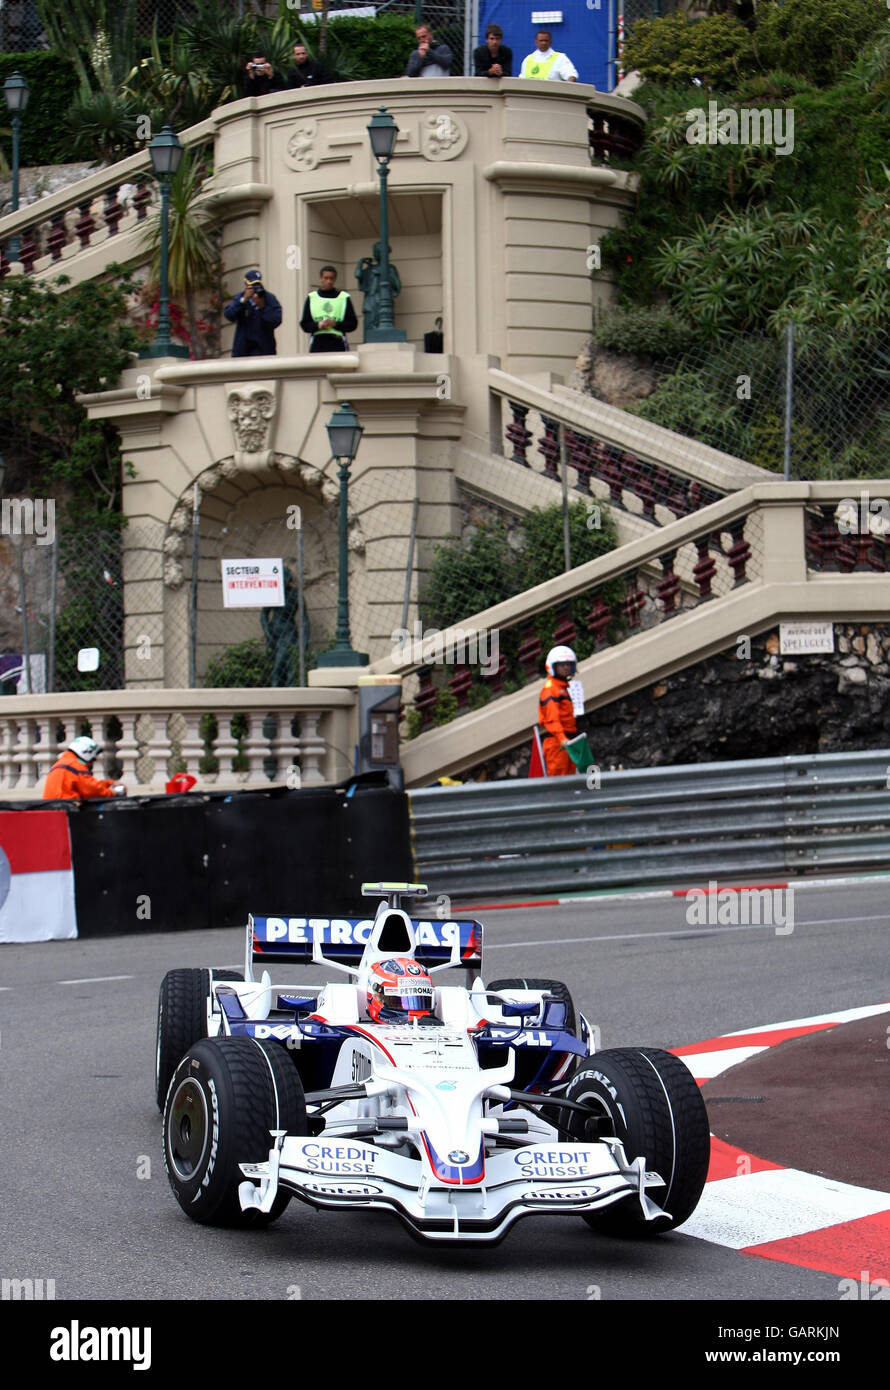 Formula One Motor Racing - Monaco Grand Prix - Qualifying - Monte Carlo. Robert Kubica in the BMW Sauber goes round the Lowes Hairpin during Qualifying in Monte Carlo, Monaco. Stock Photo